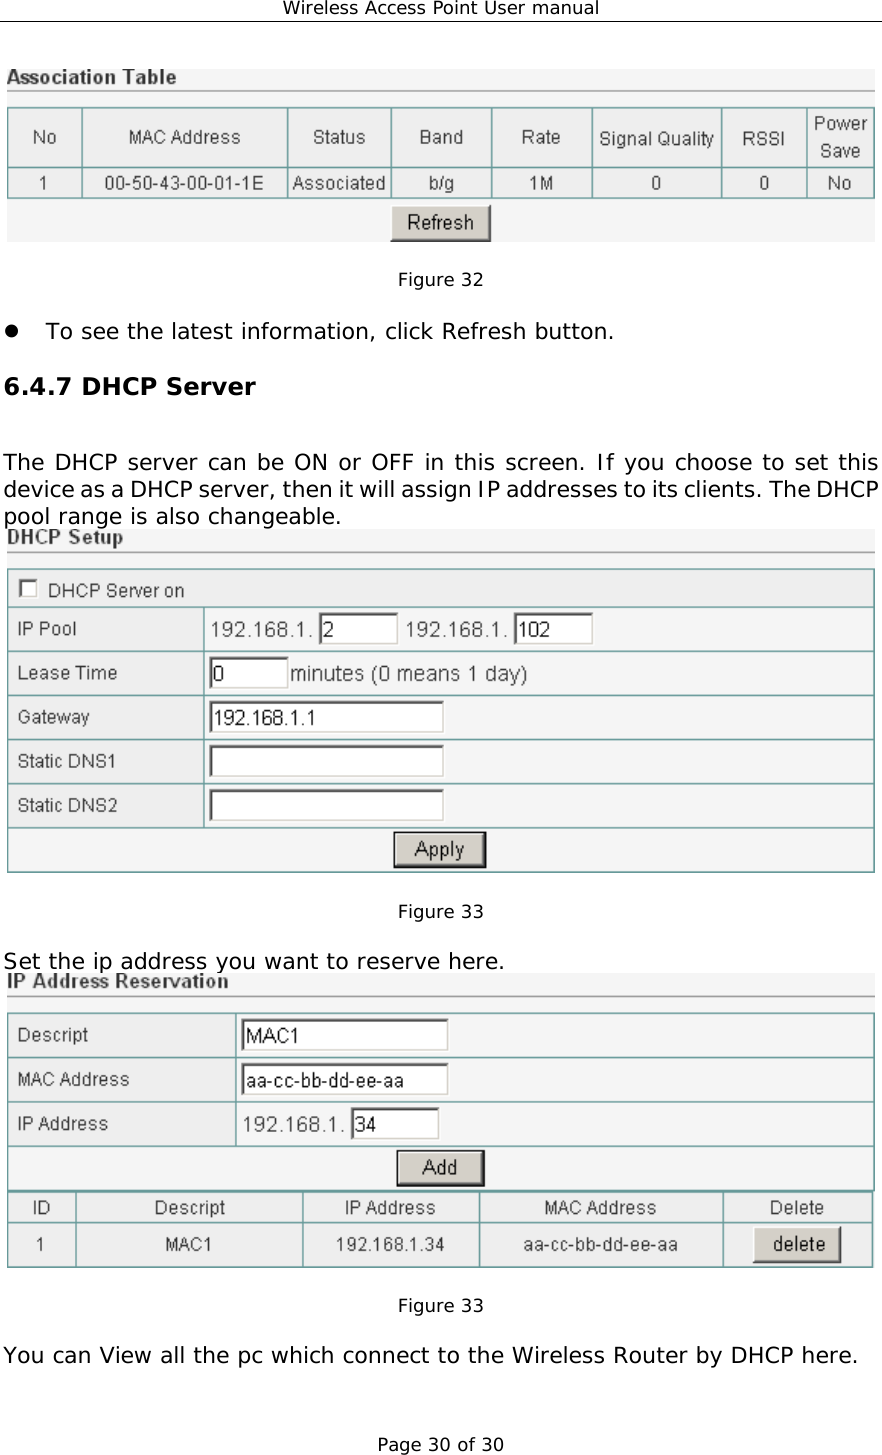 Wireless Access Point User manual Page 30 of 30   Figure 32    To see the latest information, click Refresh button. 6.4.7 DHCP Server The DHCP server can be ON or OFF in this screen. If you choose to set this device as a DHCP server, then it will assign IP addresses to its clients. The DHCP pool range is also changeable.   Figure 33  Set the ip address you want to reserve here.   Figure 33  You can View all the pc which connect to the Wireless Router by DHCP here. 